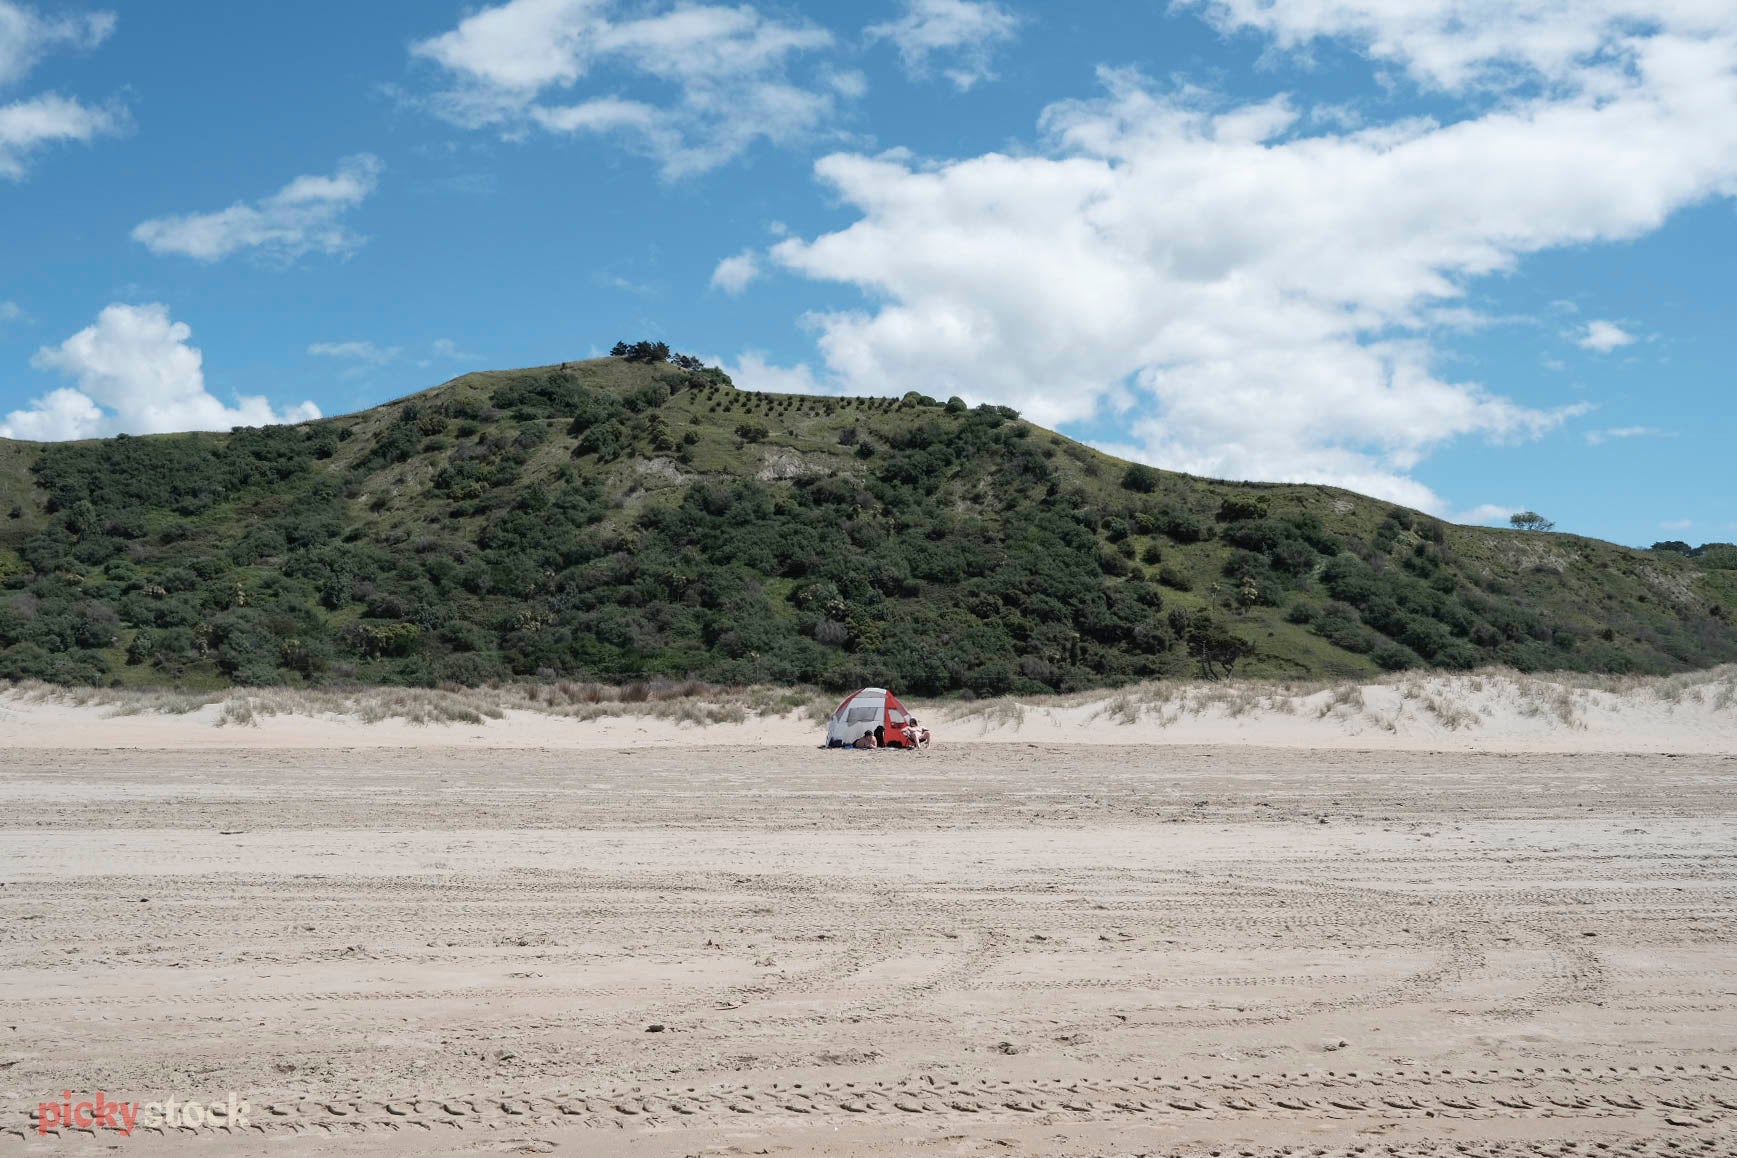 Looking back from the beach towards the sandunes of Ocean beach, Hawke's Bay. A little tent can be seen up near the sanddunes on the bright blue day. 